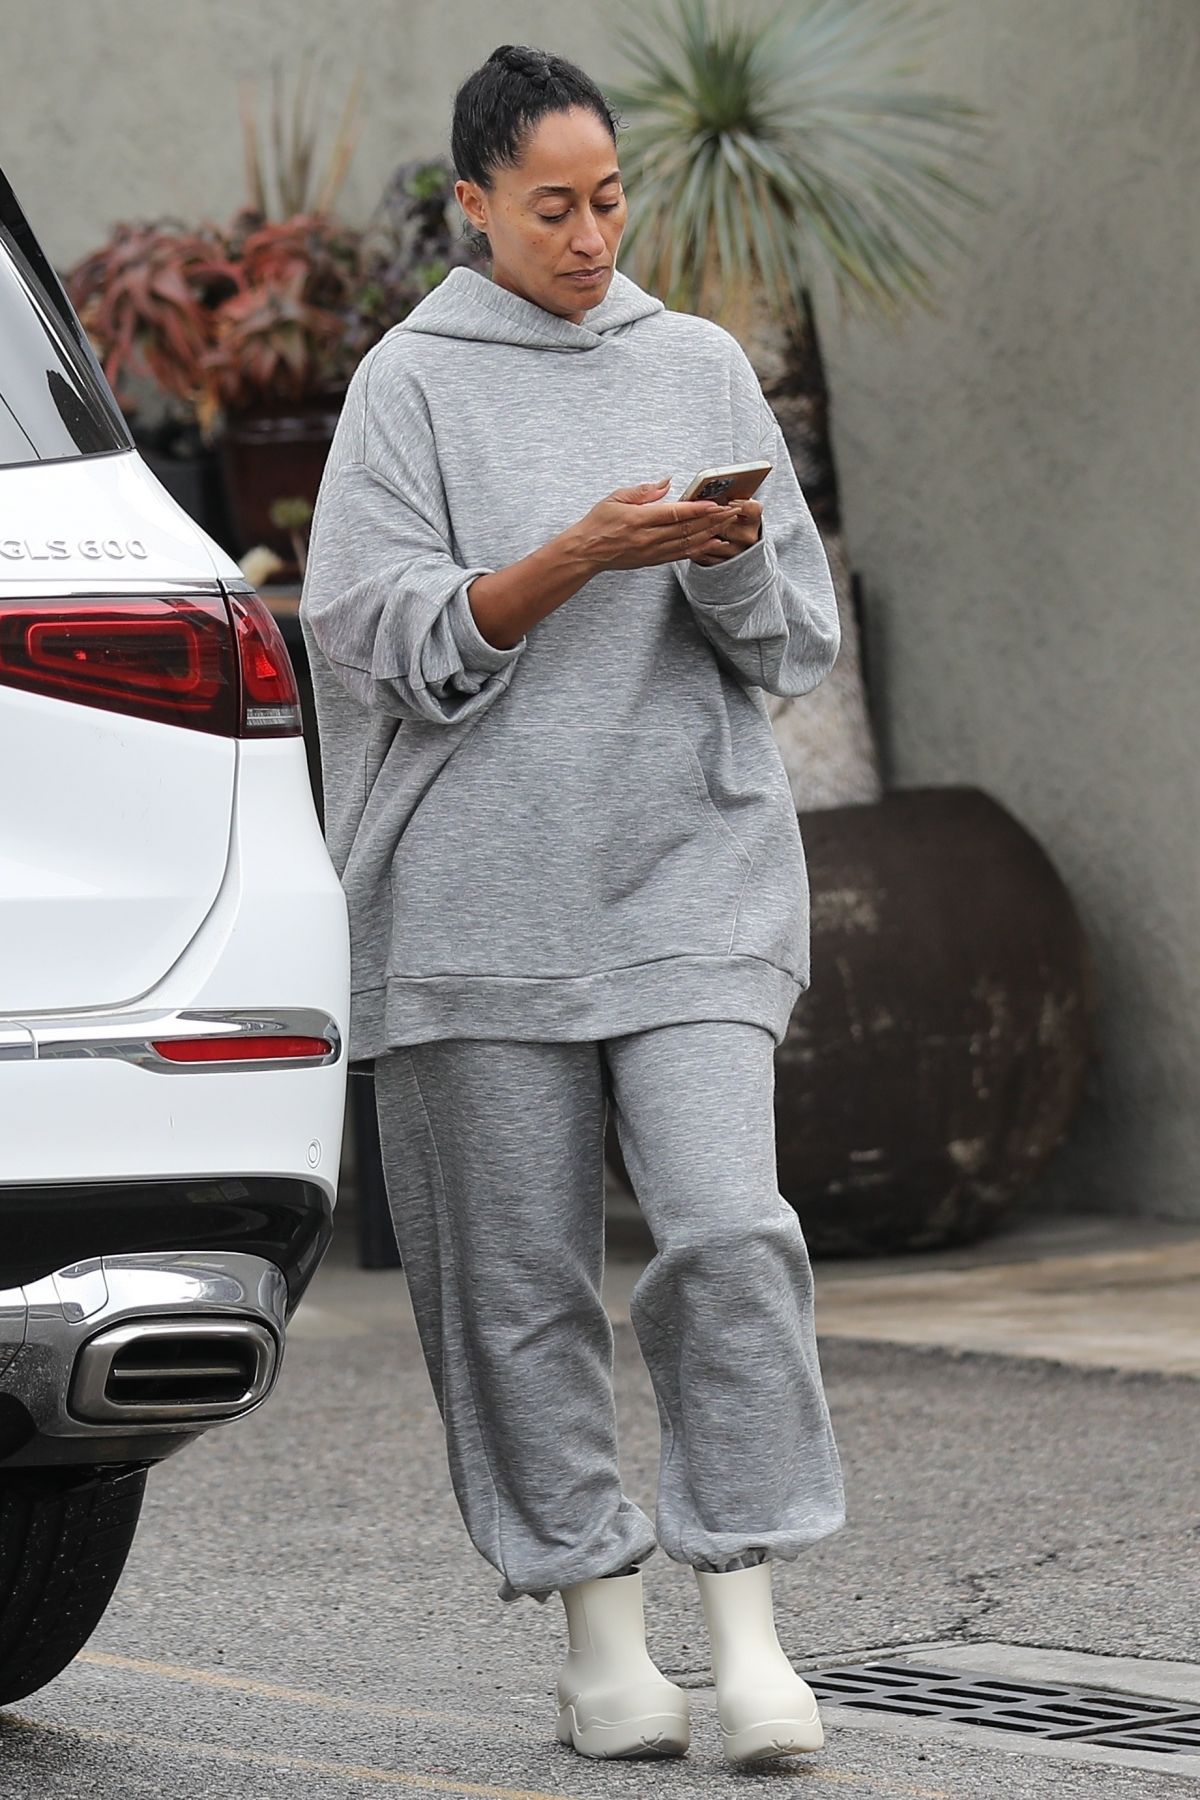 TRACEE ELLIS ROSS Leaves a Nail Spa in Los Angeles 11/08/2022 – HawtCelebs